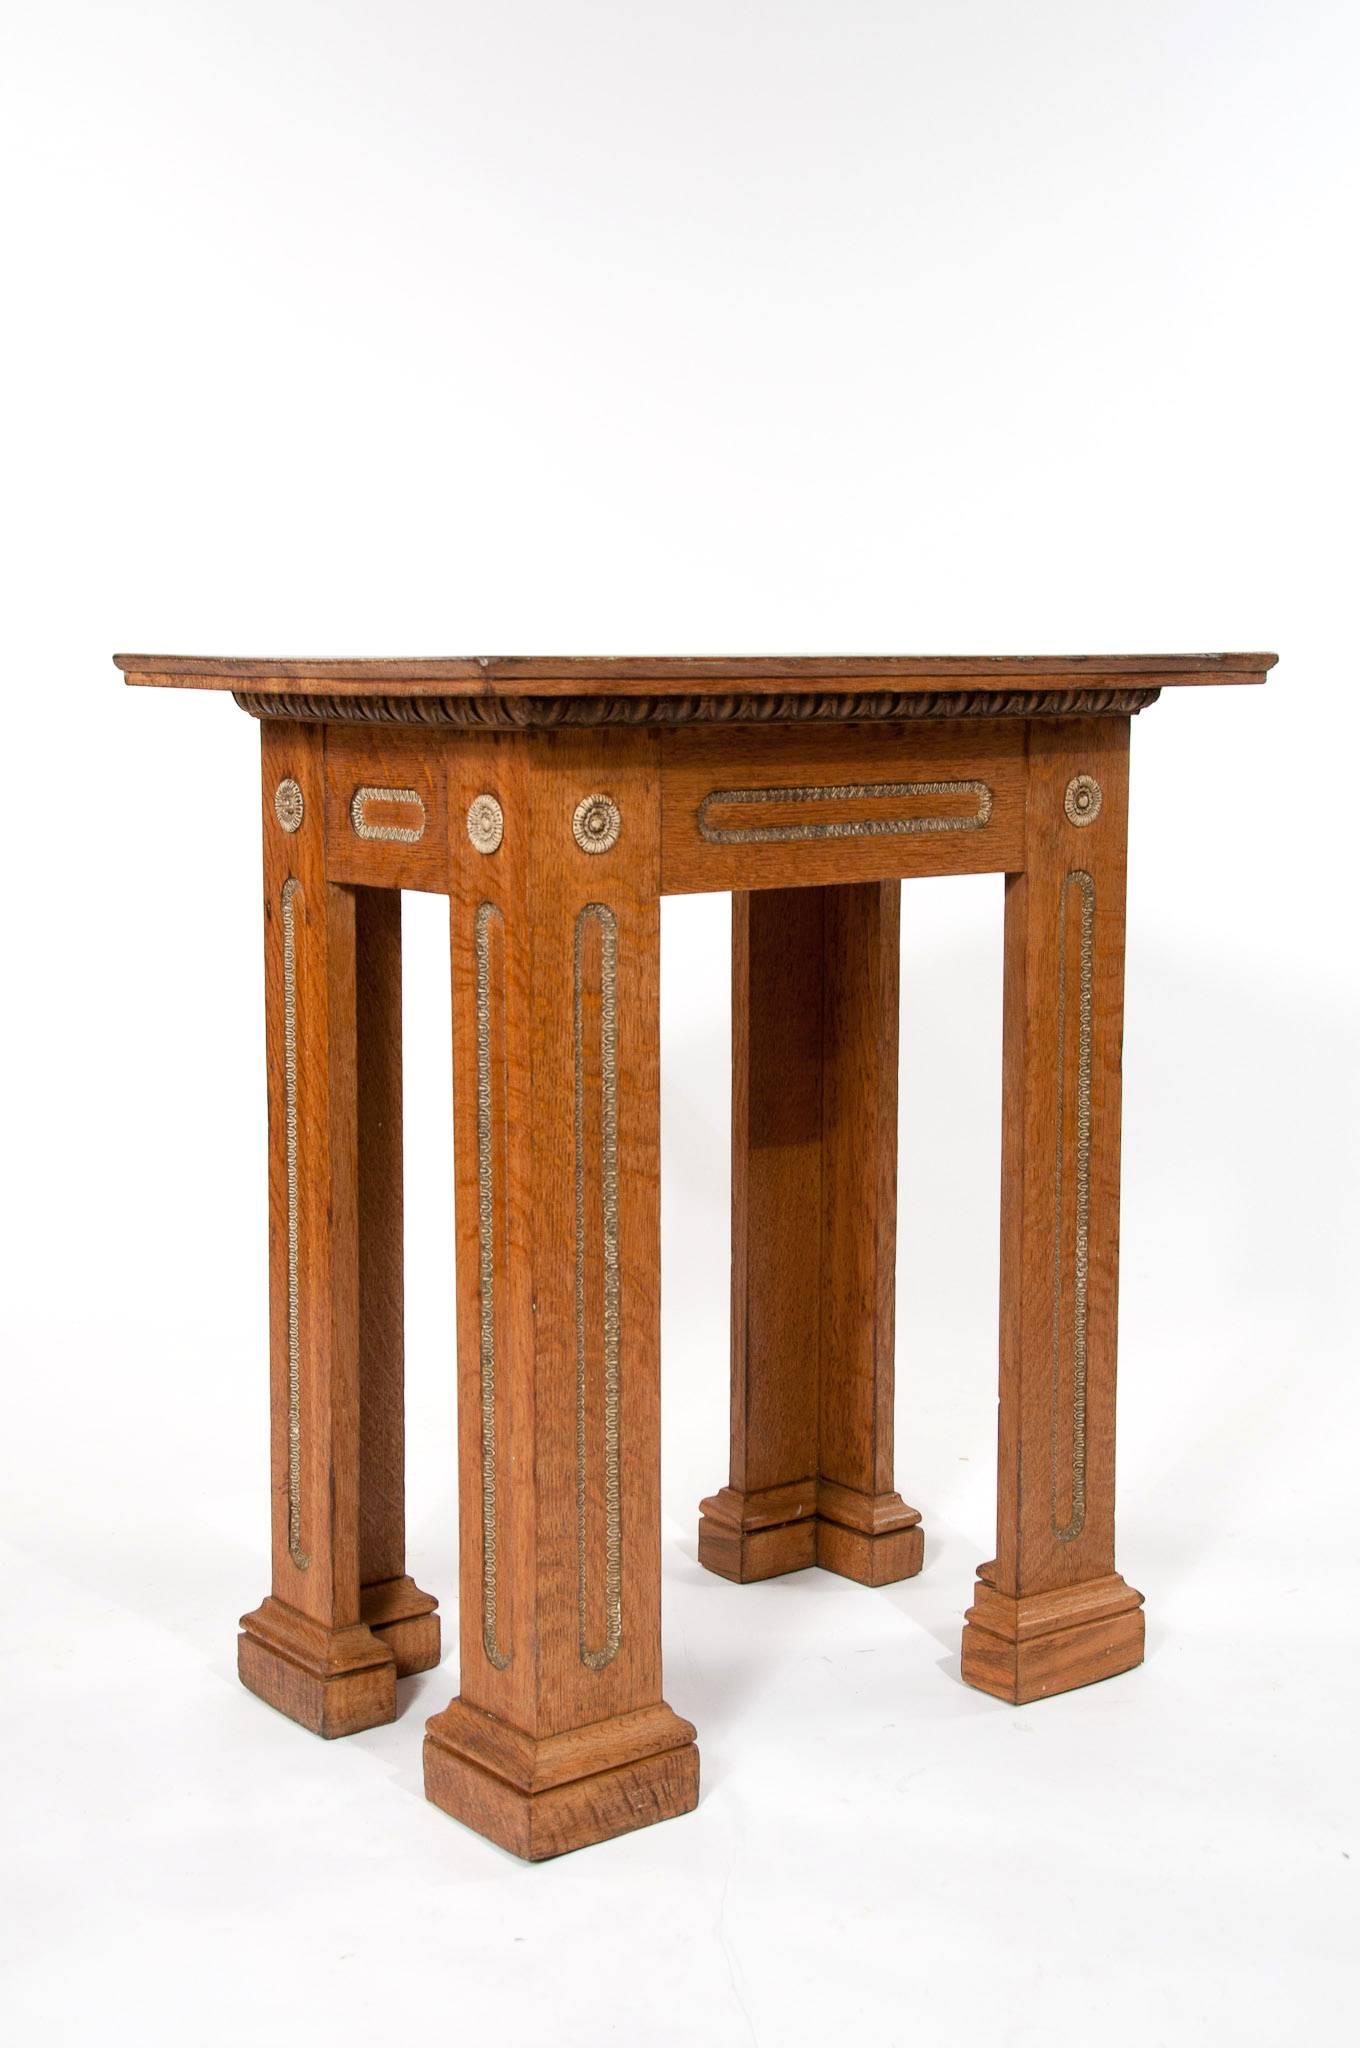 Early 20th Century Unusual Antique Oak Architectural Table